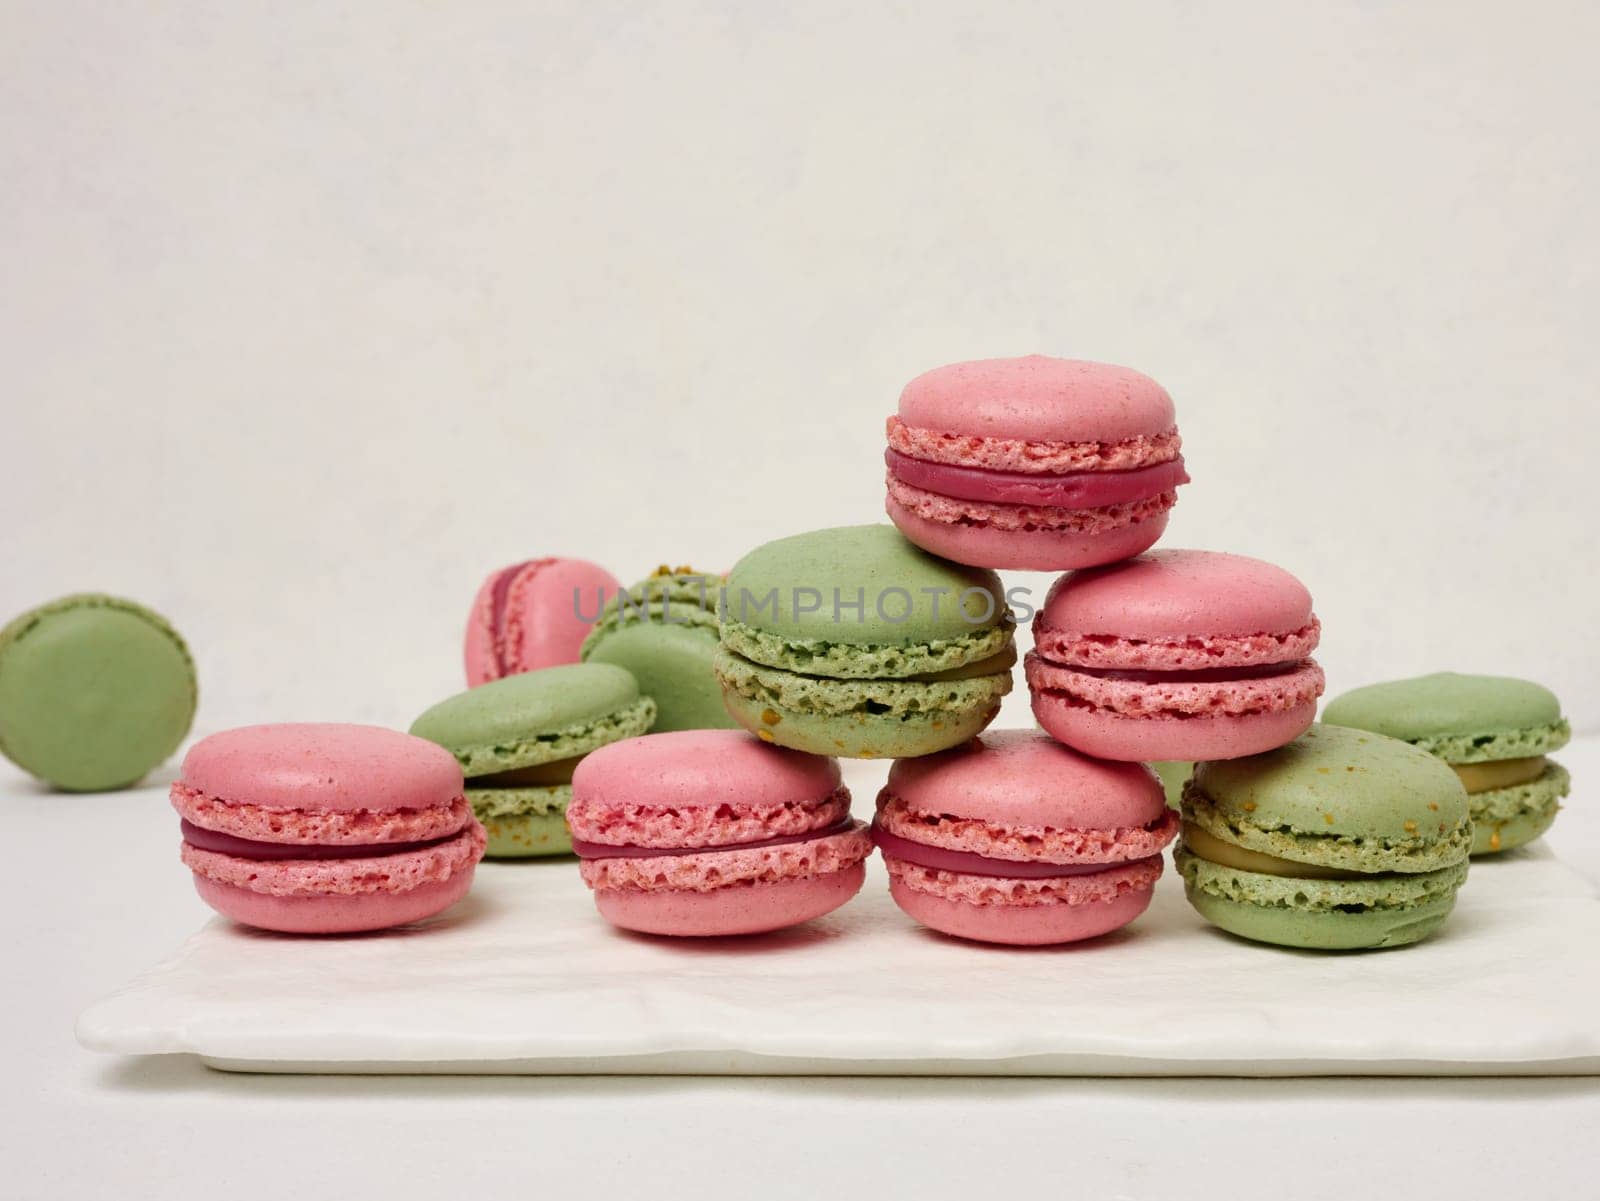 Raspberry and pistachio macarons on a white background, French dessert